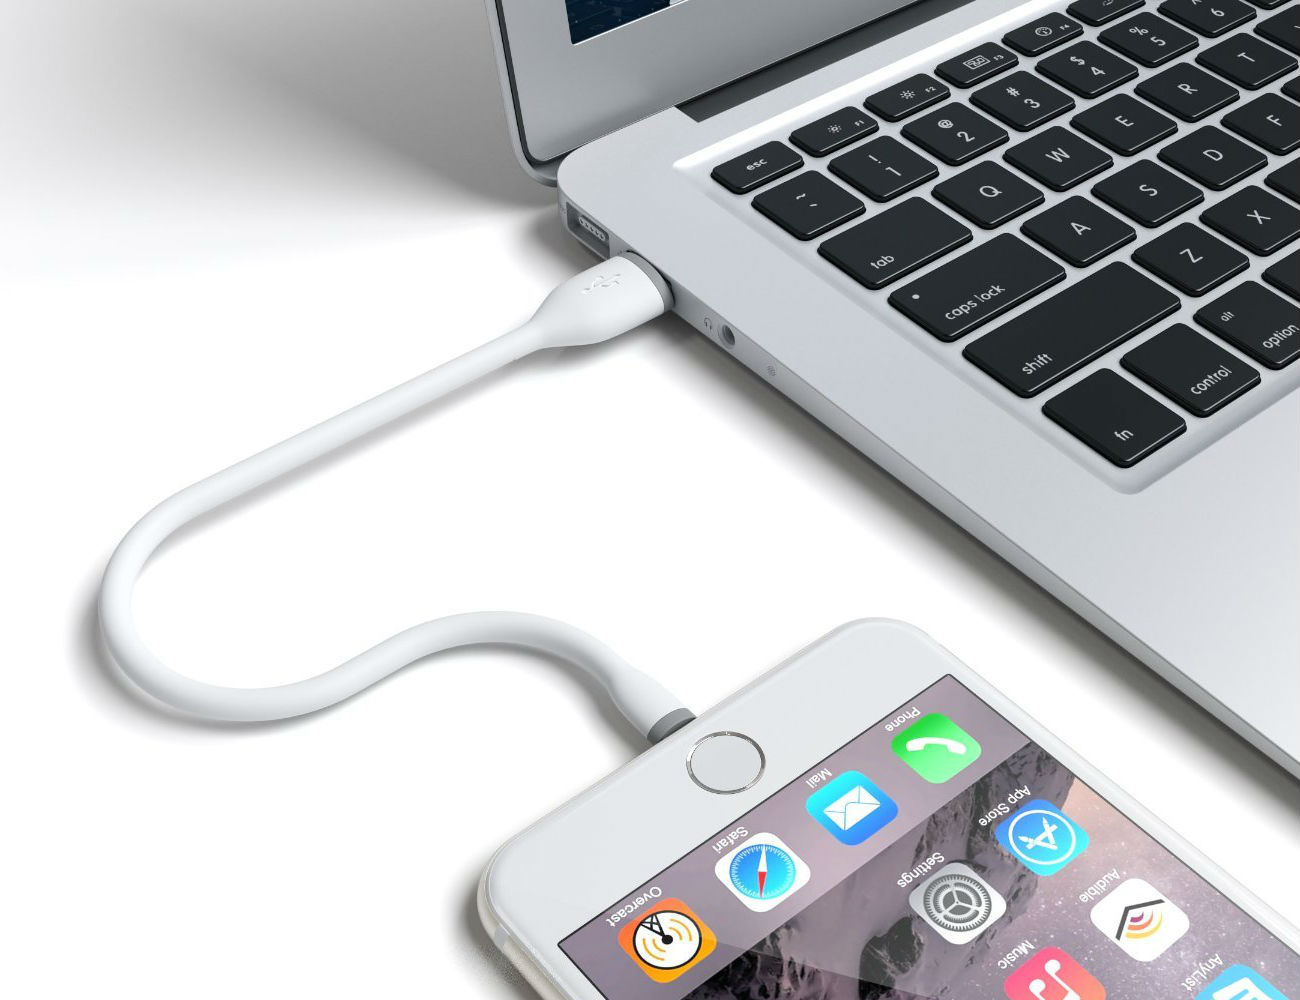 Satechi Flexible Lightning to USB Cable